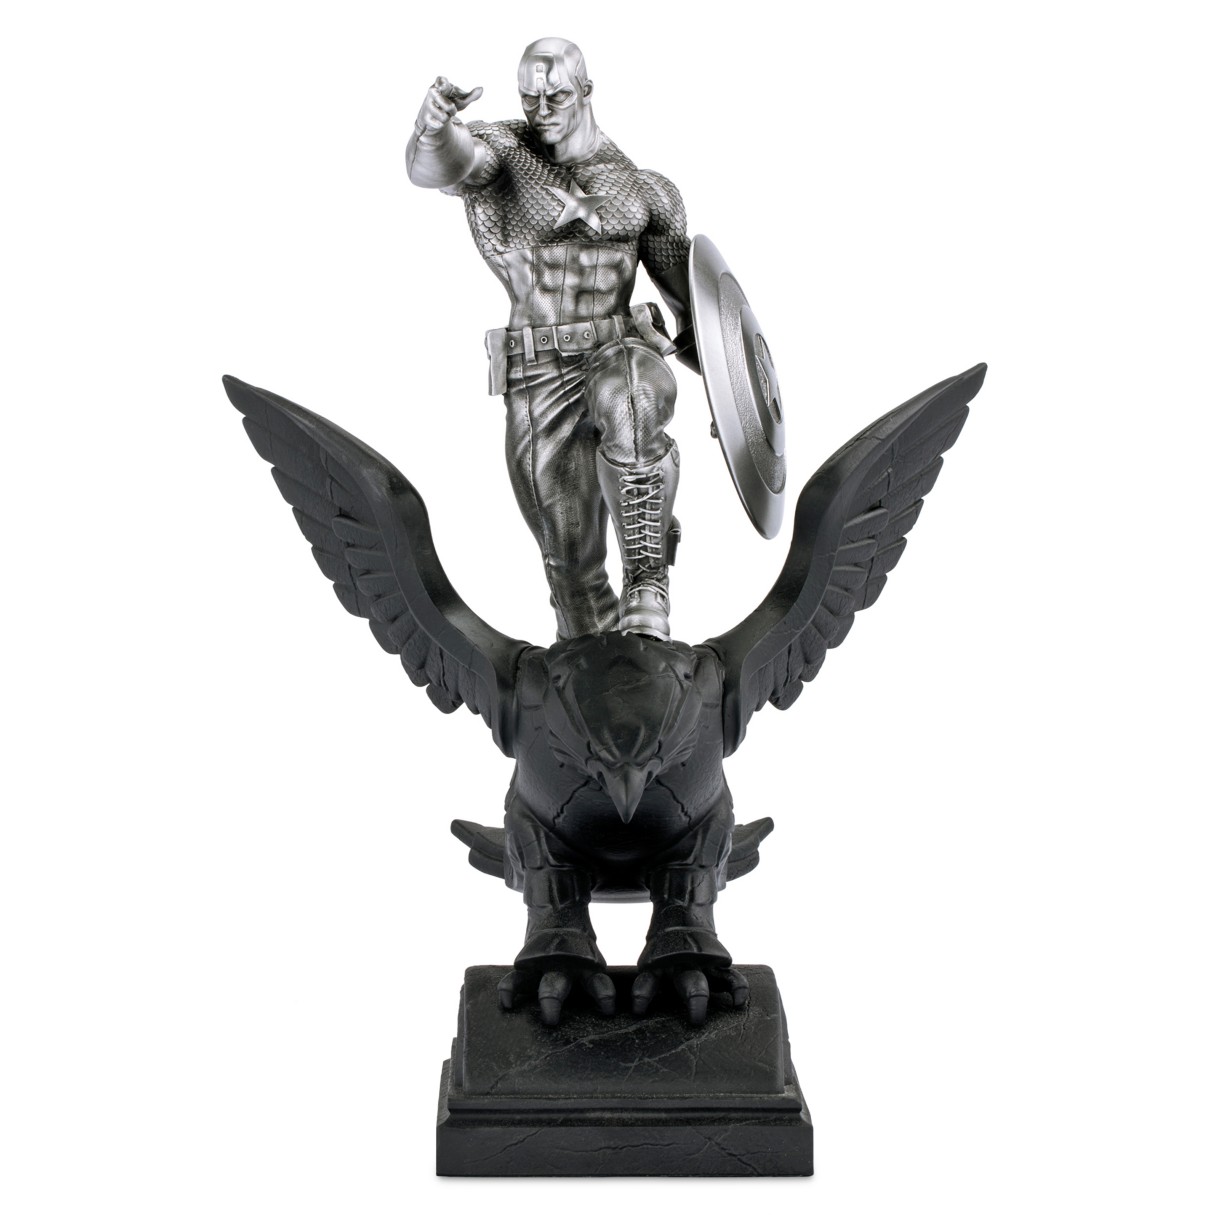 Captain America Resolute Pewter Figurine by Royal Selangor – Limited Edition